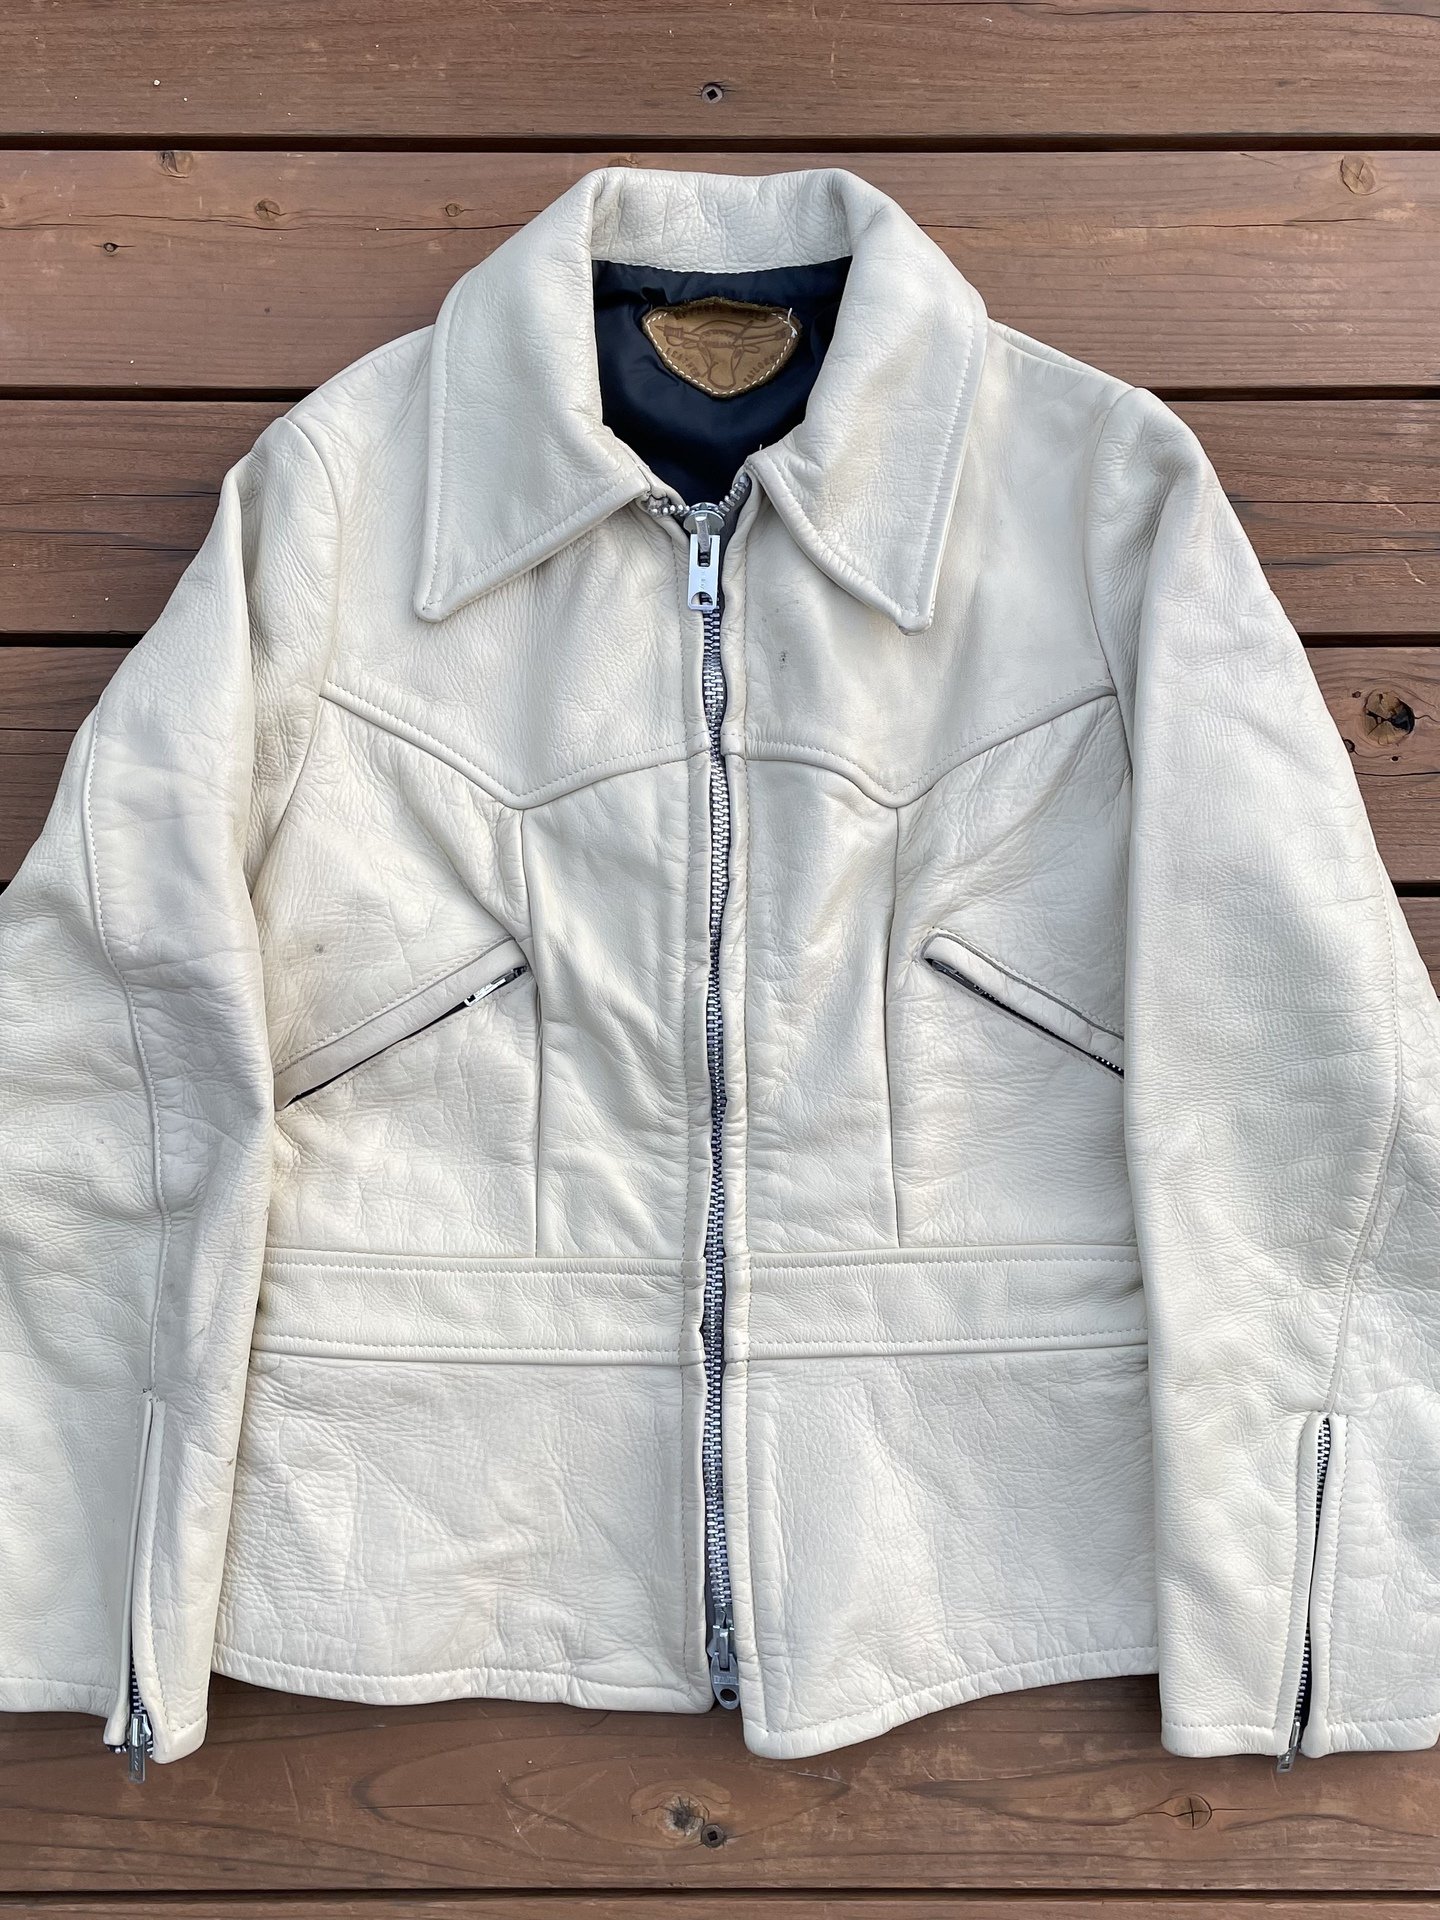 1960〜70's WHITE LEATHER JACKET by 